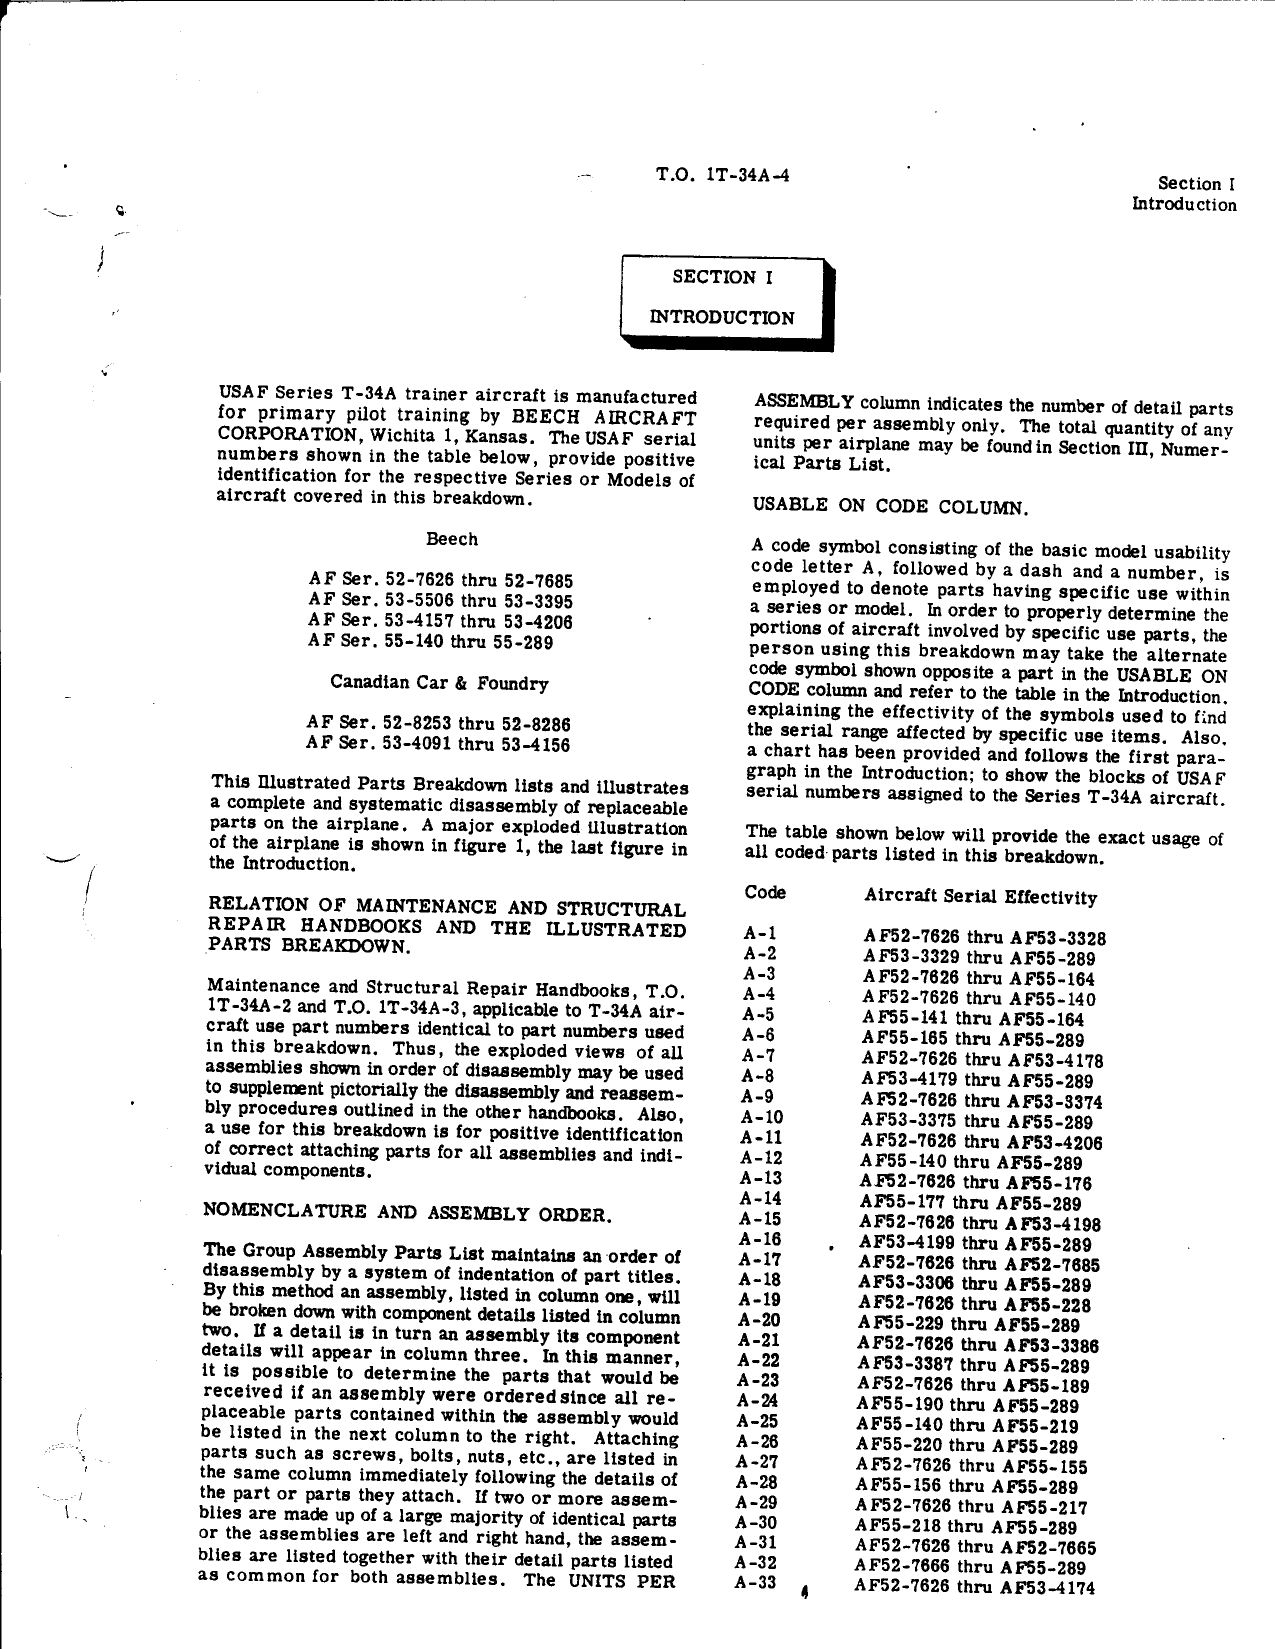 Sample page 5 from AirCorps Library document: Illustrated Parts Breakdown for USAF Series T-34A Aircraft